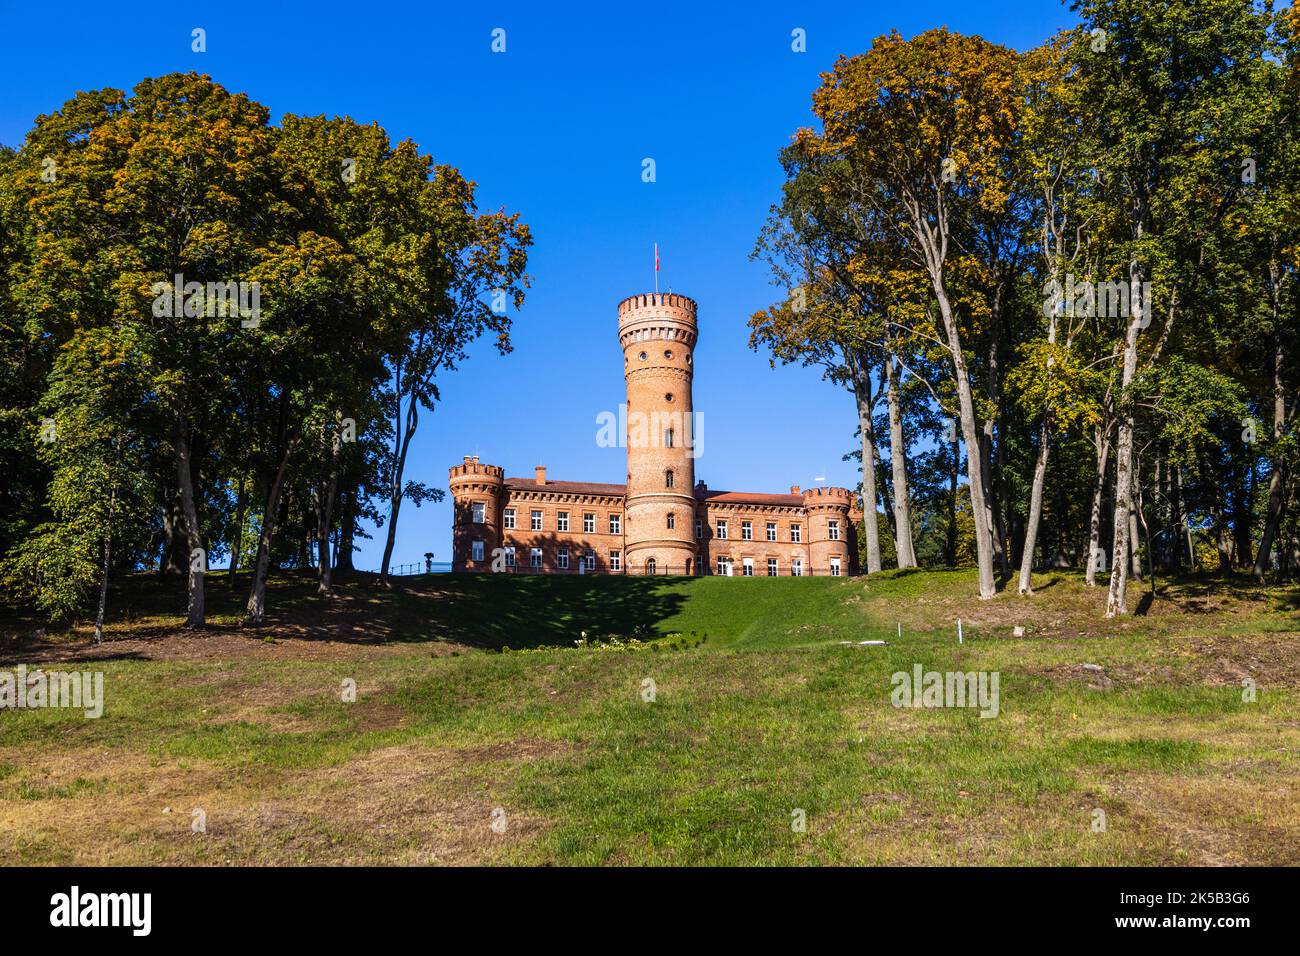 Castle of Raudone - Renaissance style manor with a cylindrical tower Stock Photo